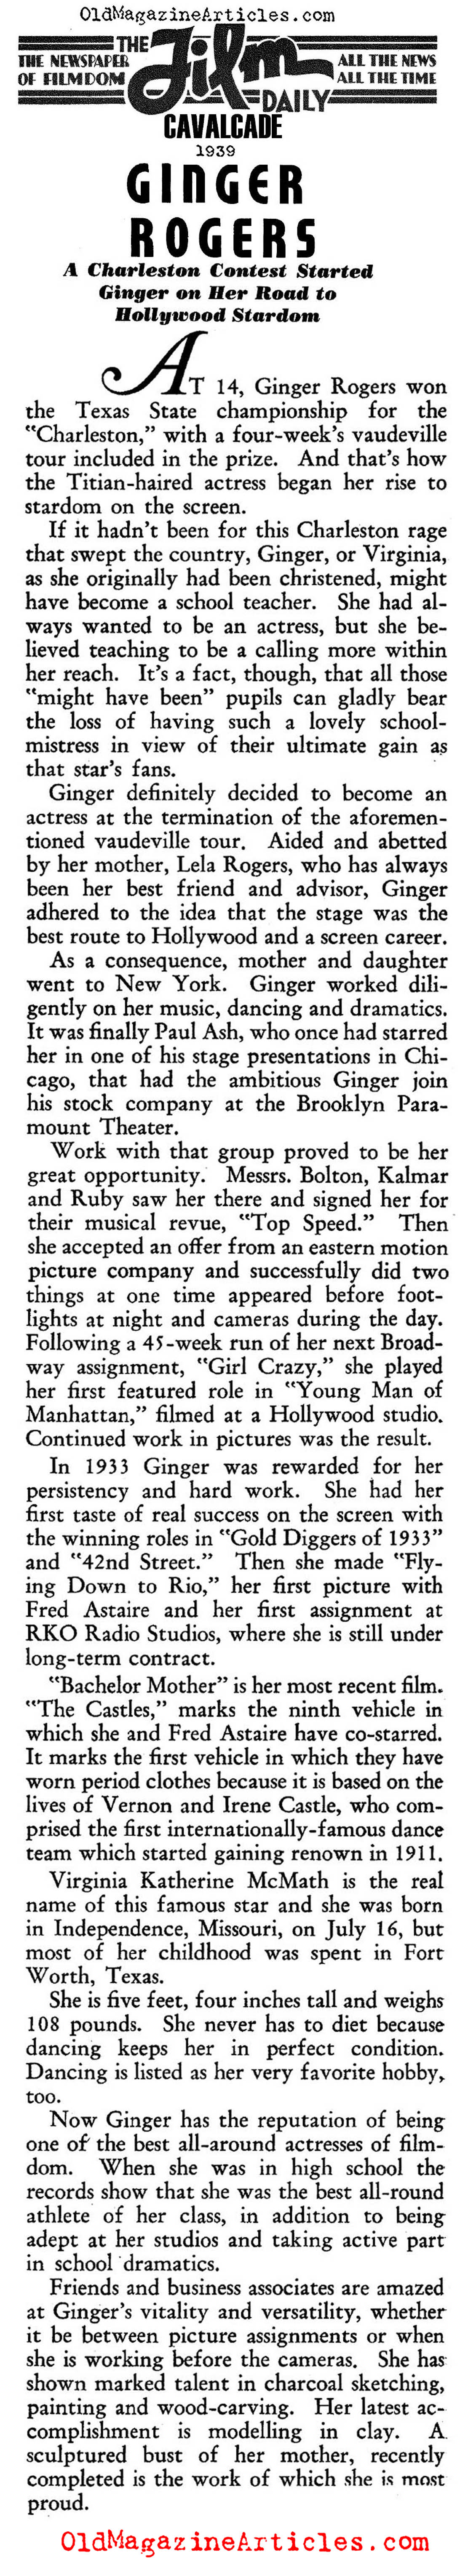 Ginger Rogers (Film Daily, 1939)